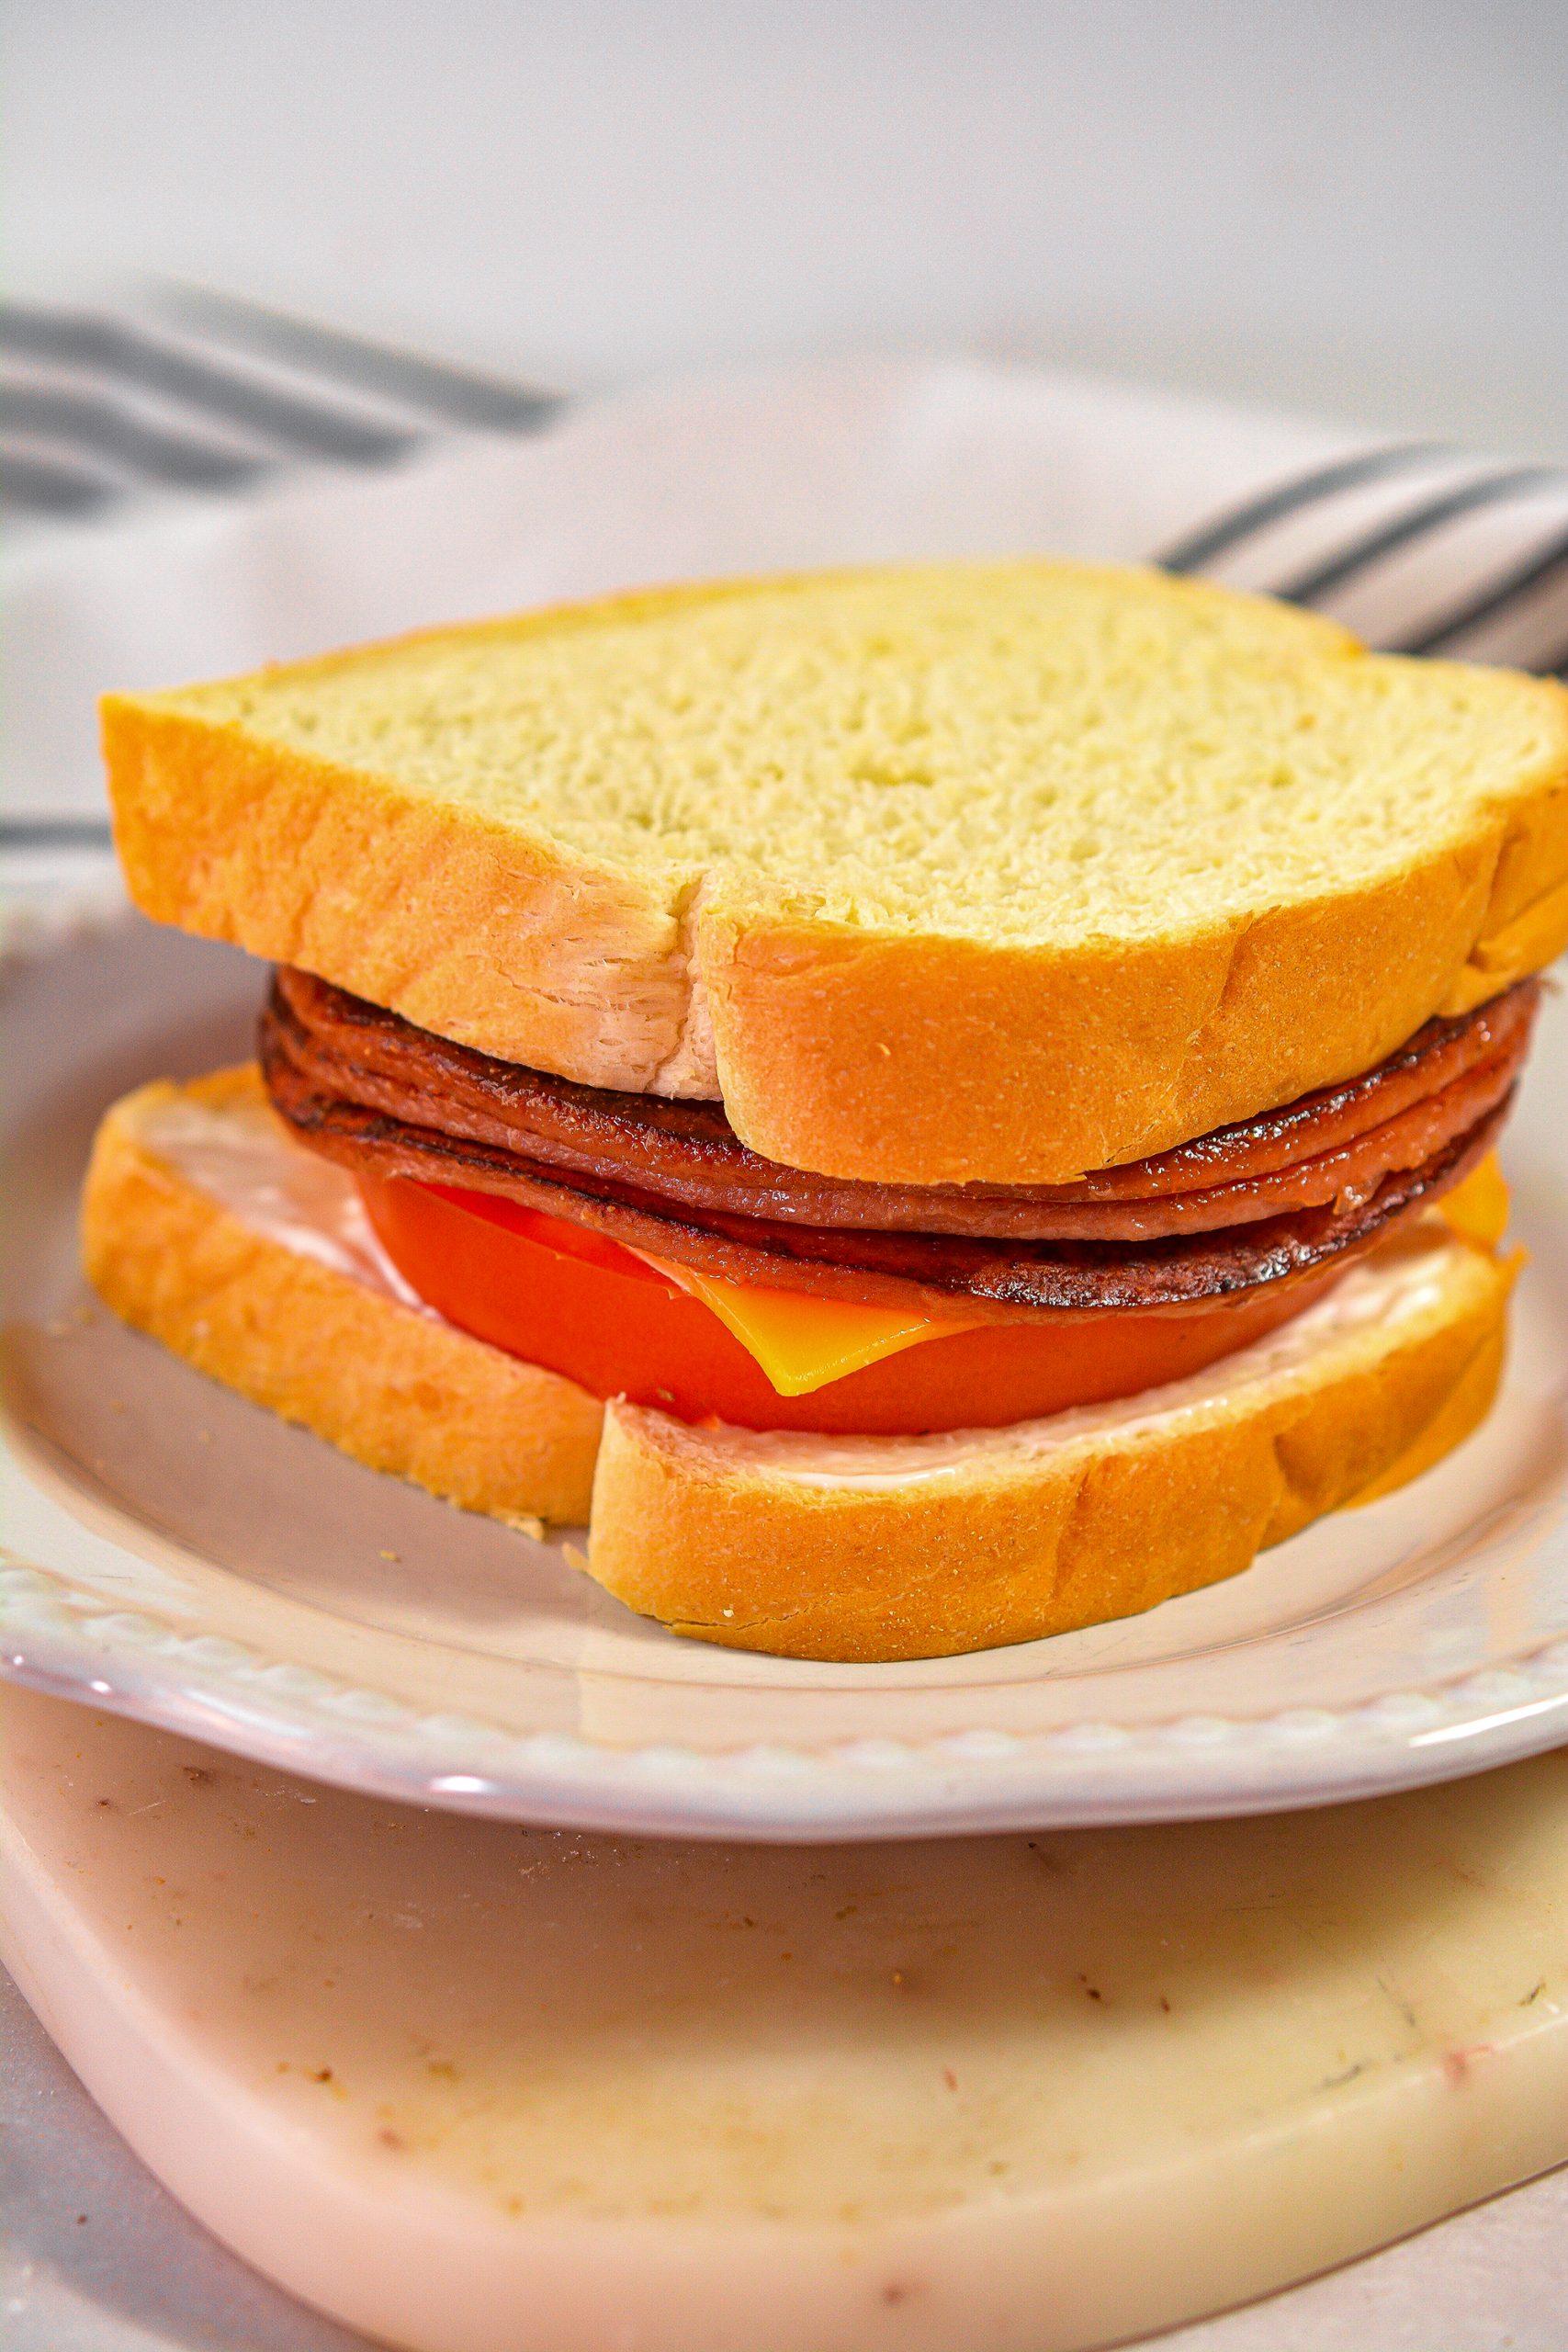 Top each sandwich with the remaining pieces of bread and serve.